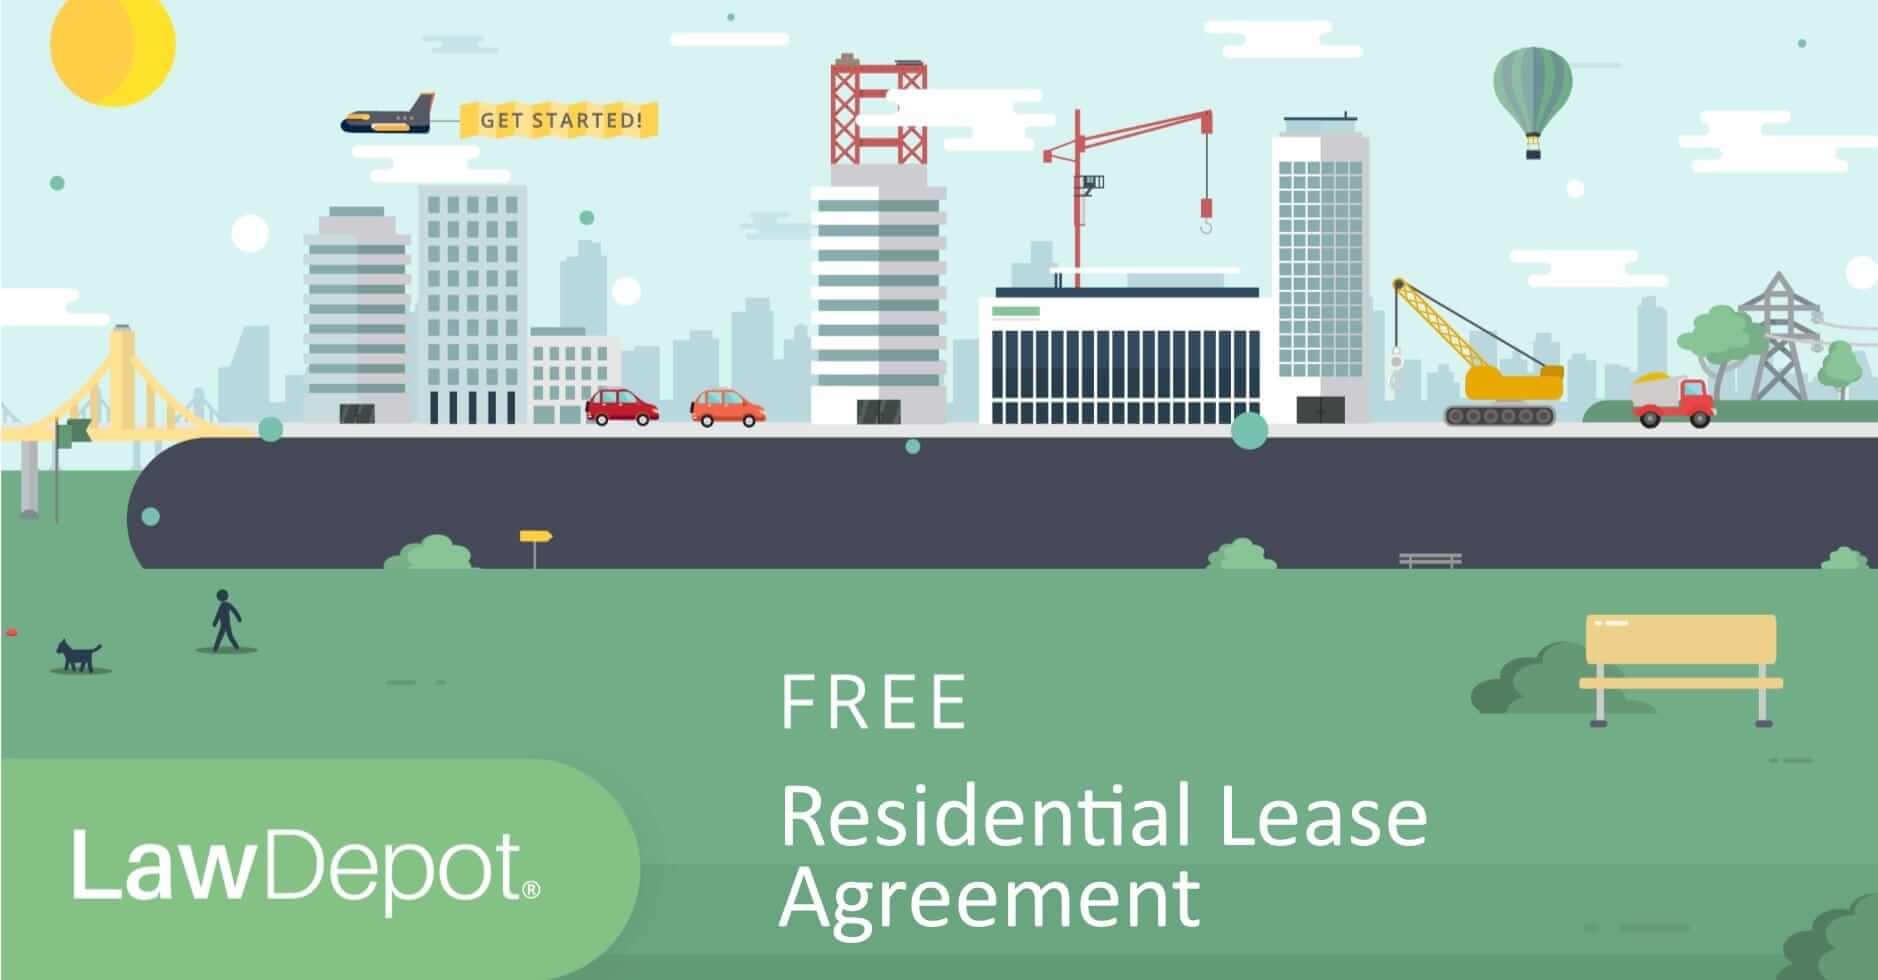 Residential Lease Agreement Free Rental Lease Form Us